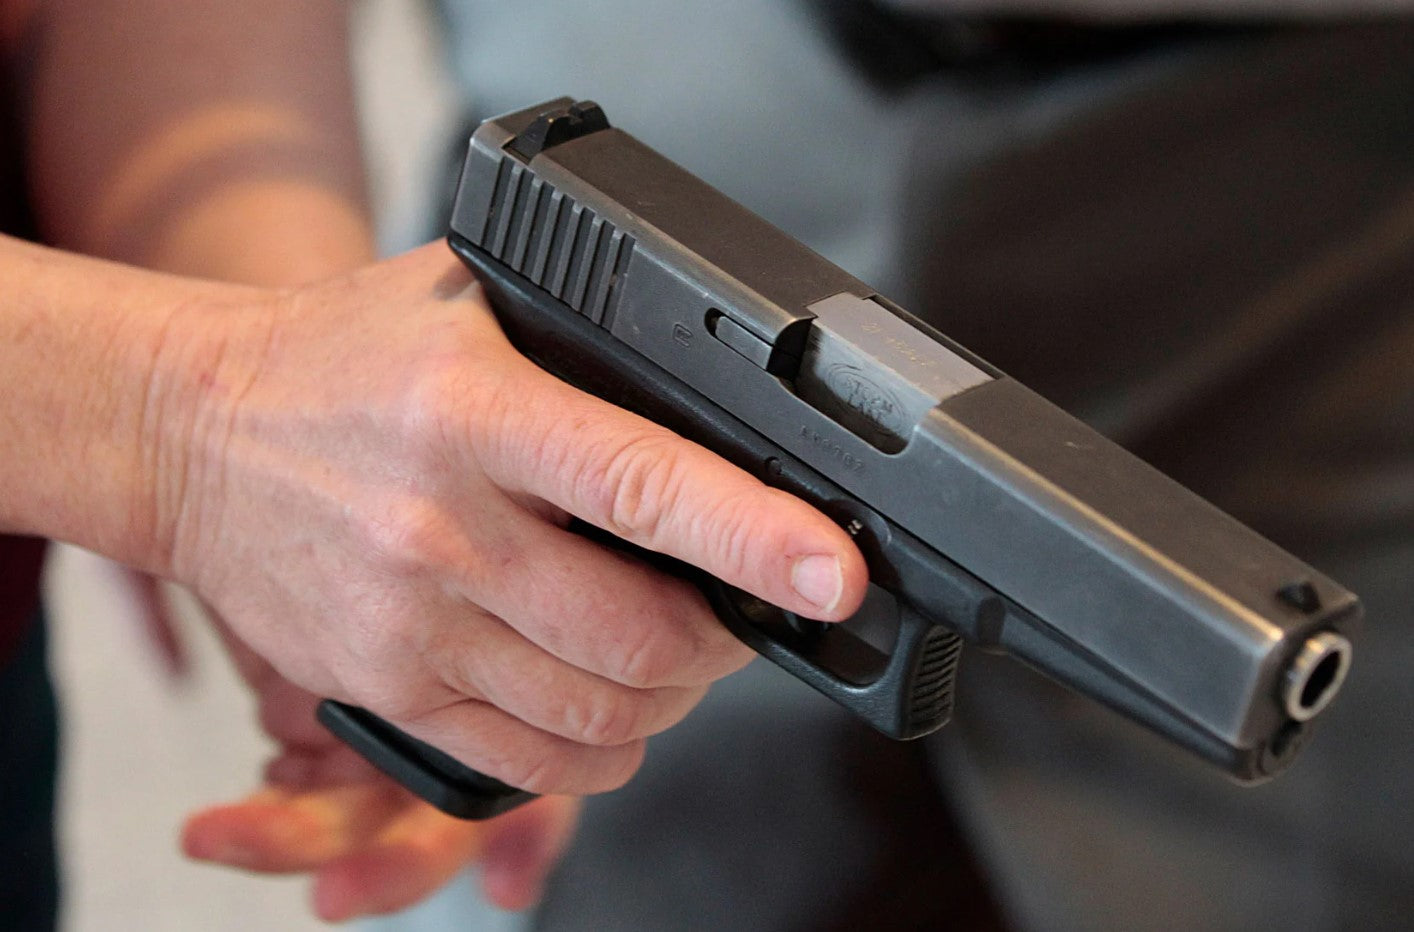 The Psychological Effects of Concealed Carry